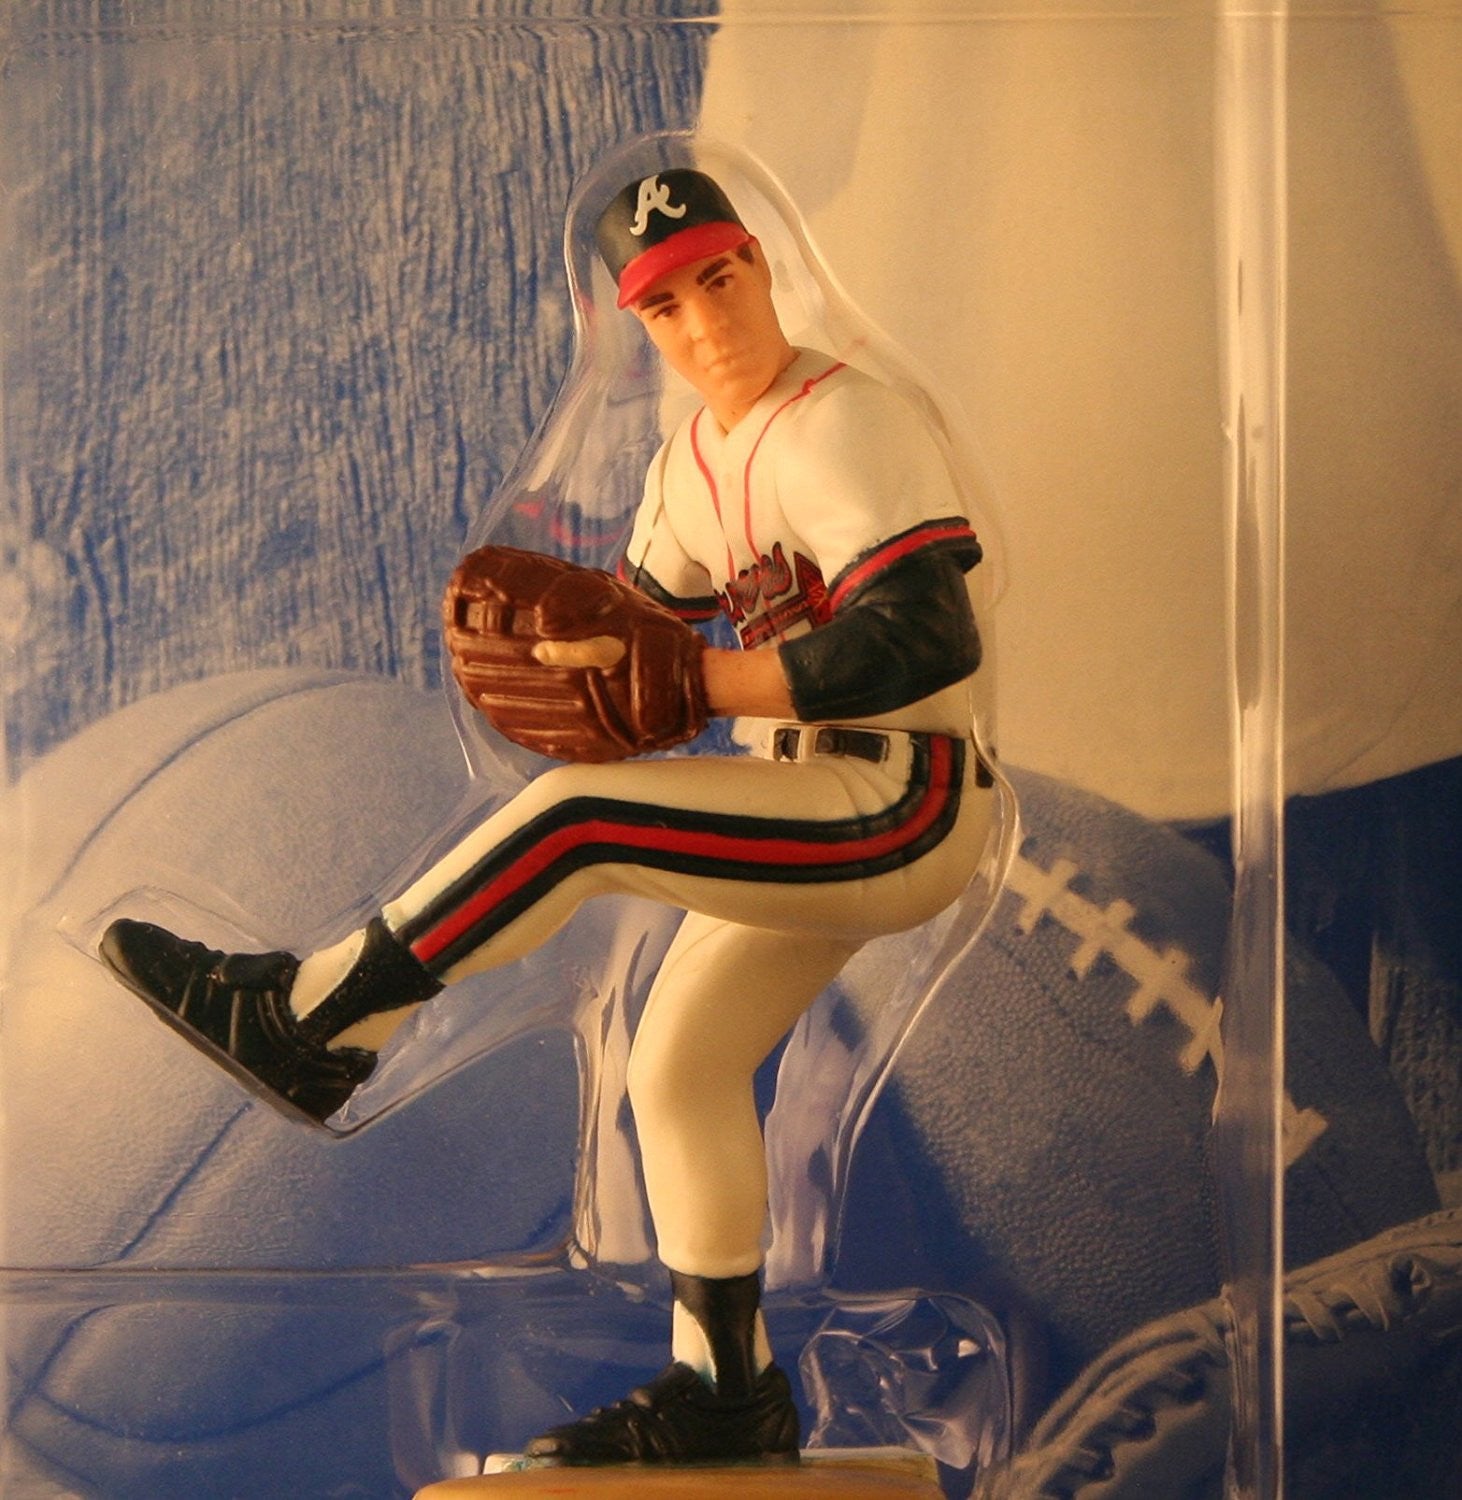 GREG MADDUX / ATLANTA BRAVES & CY YOUNG / BOSTON RED SOX 1997 MLB Classic Doubles * Winning Pairs Series * Starting Lineup Action Figures & 2 Exclusive Collector Trading Cards